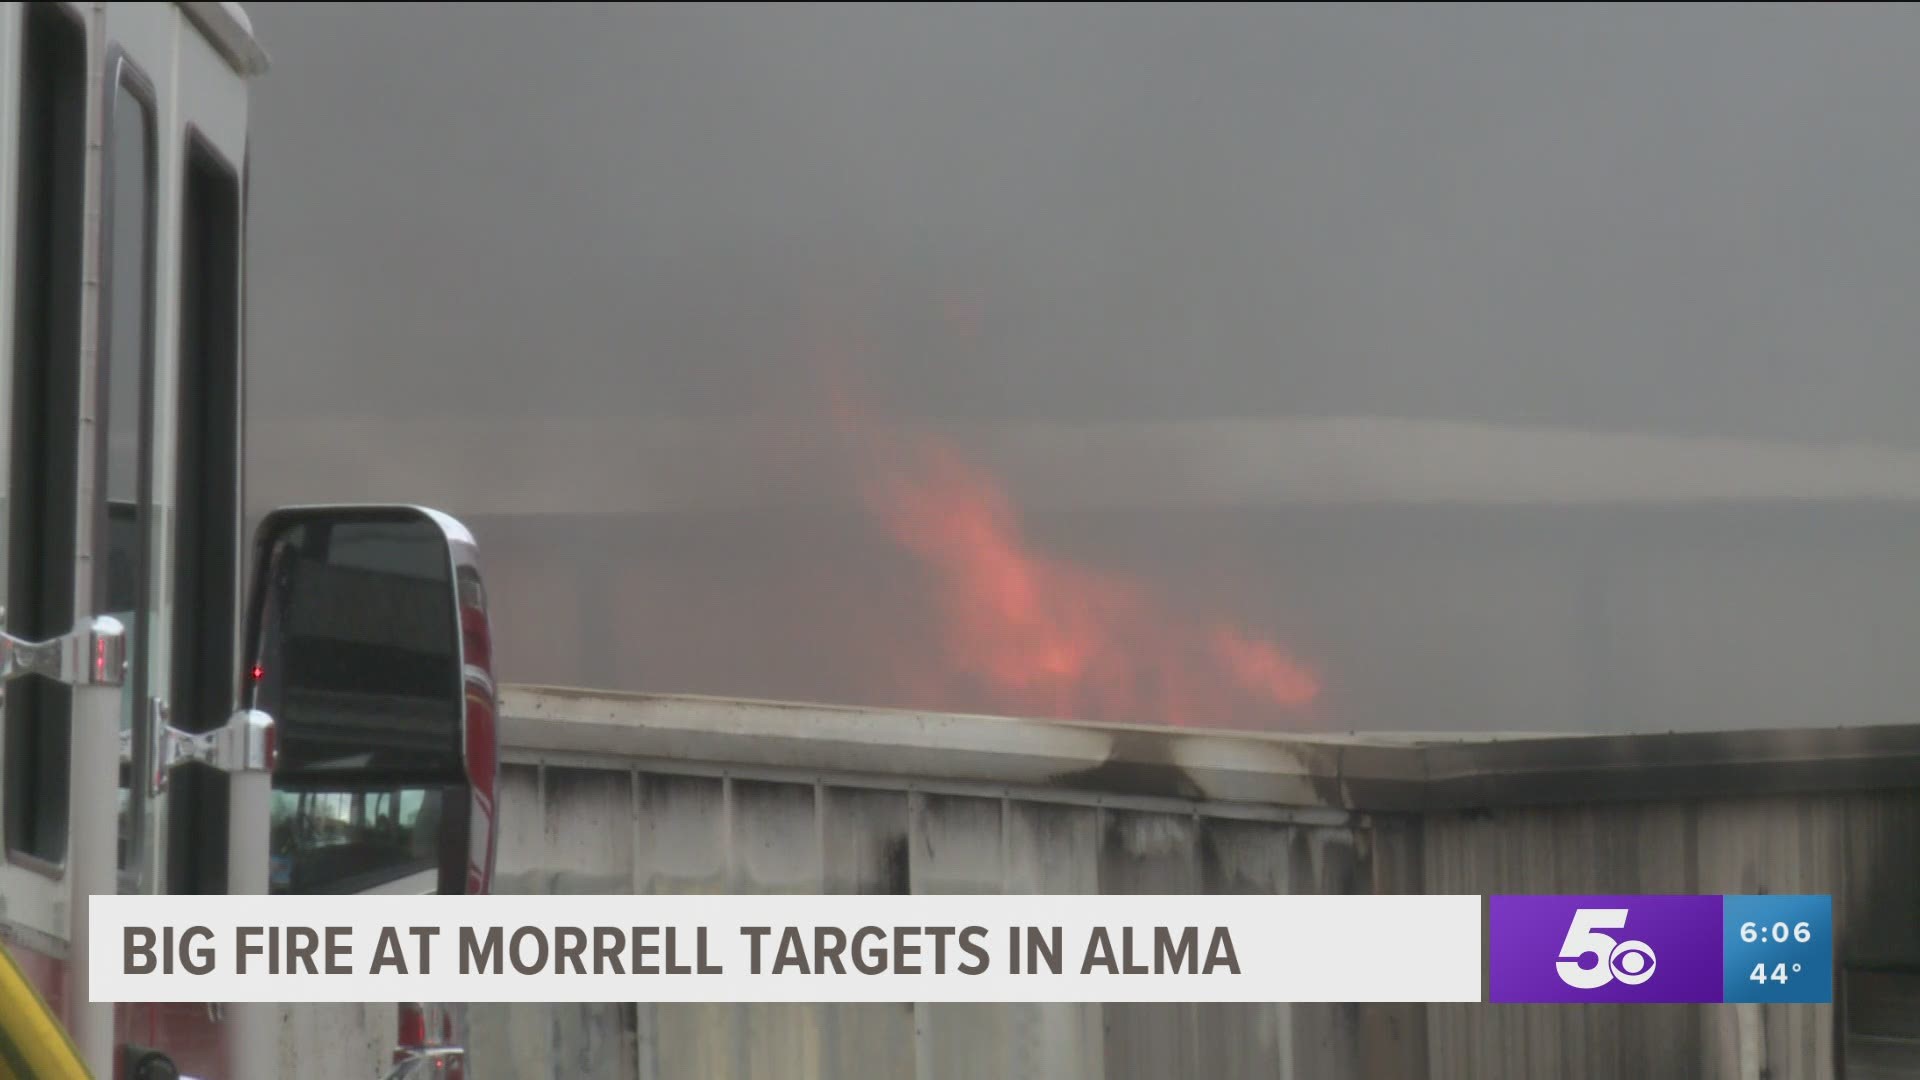 Morrell Targets caught fire sometime around 6 a.m. Friday and Alma firefighters say the fire is out but it’s still smoldering.